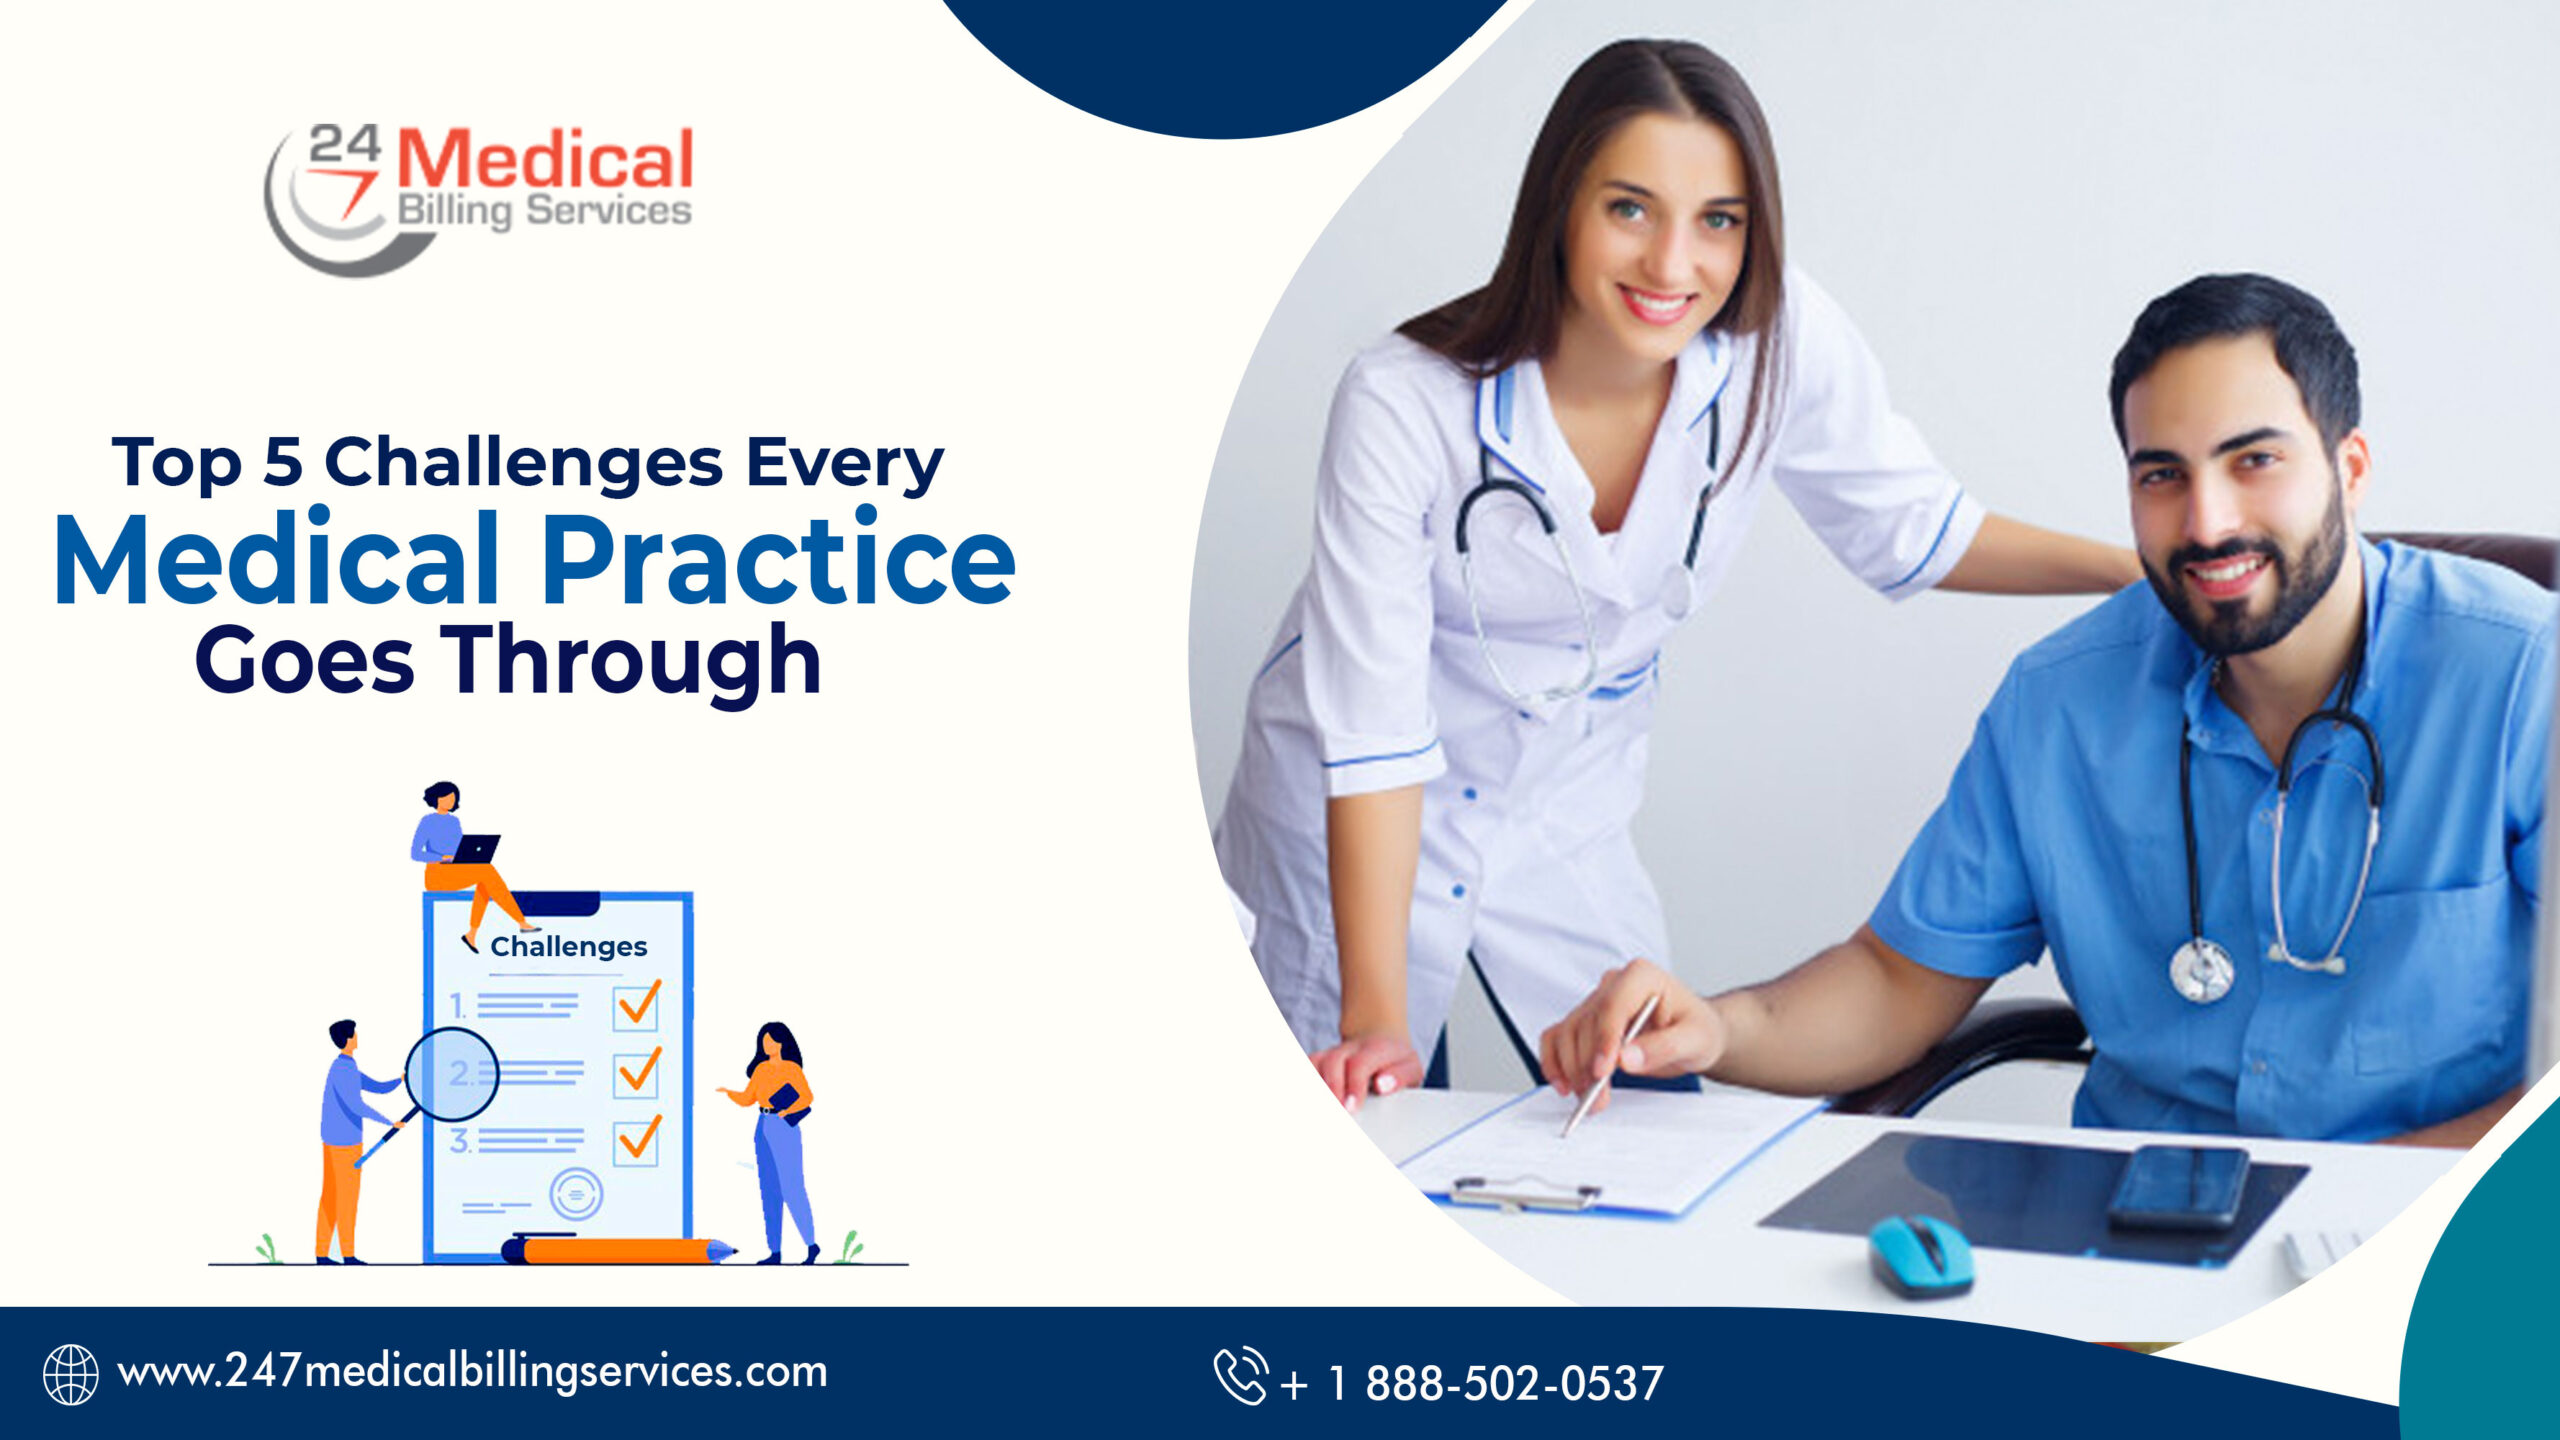  Top 5 Challenges Every Medical Practice Goes Through